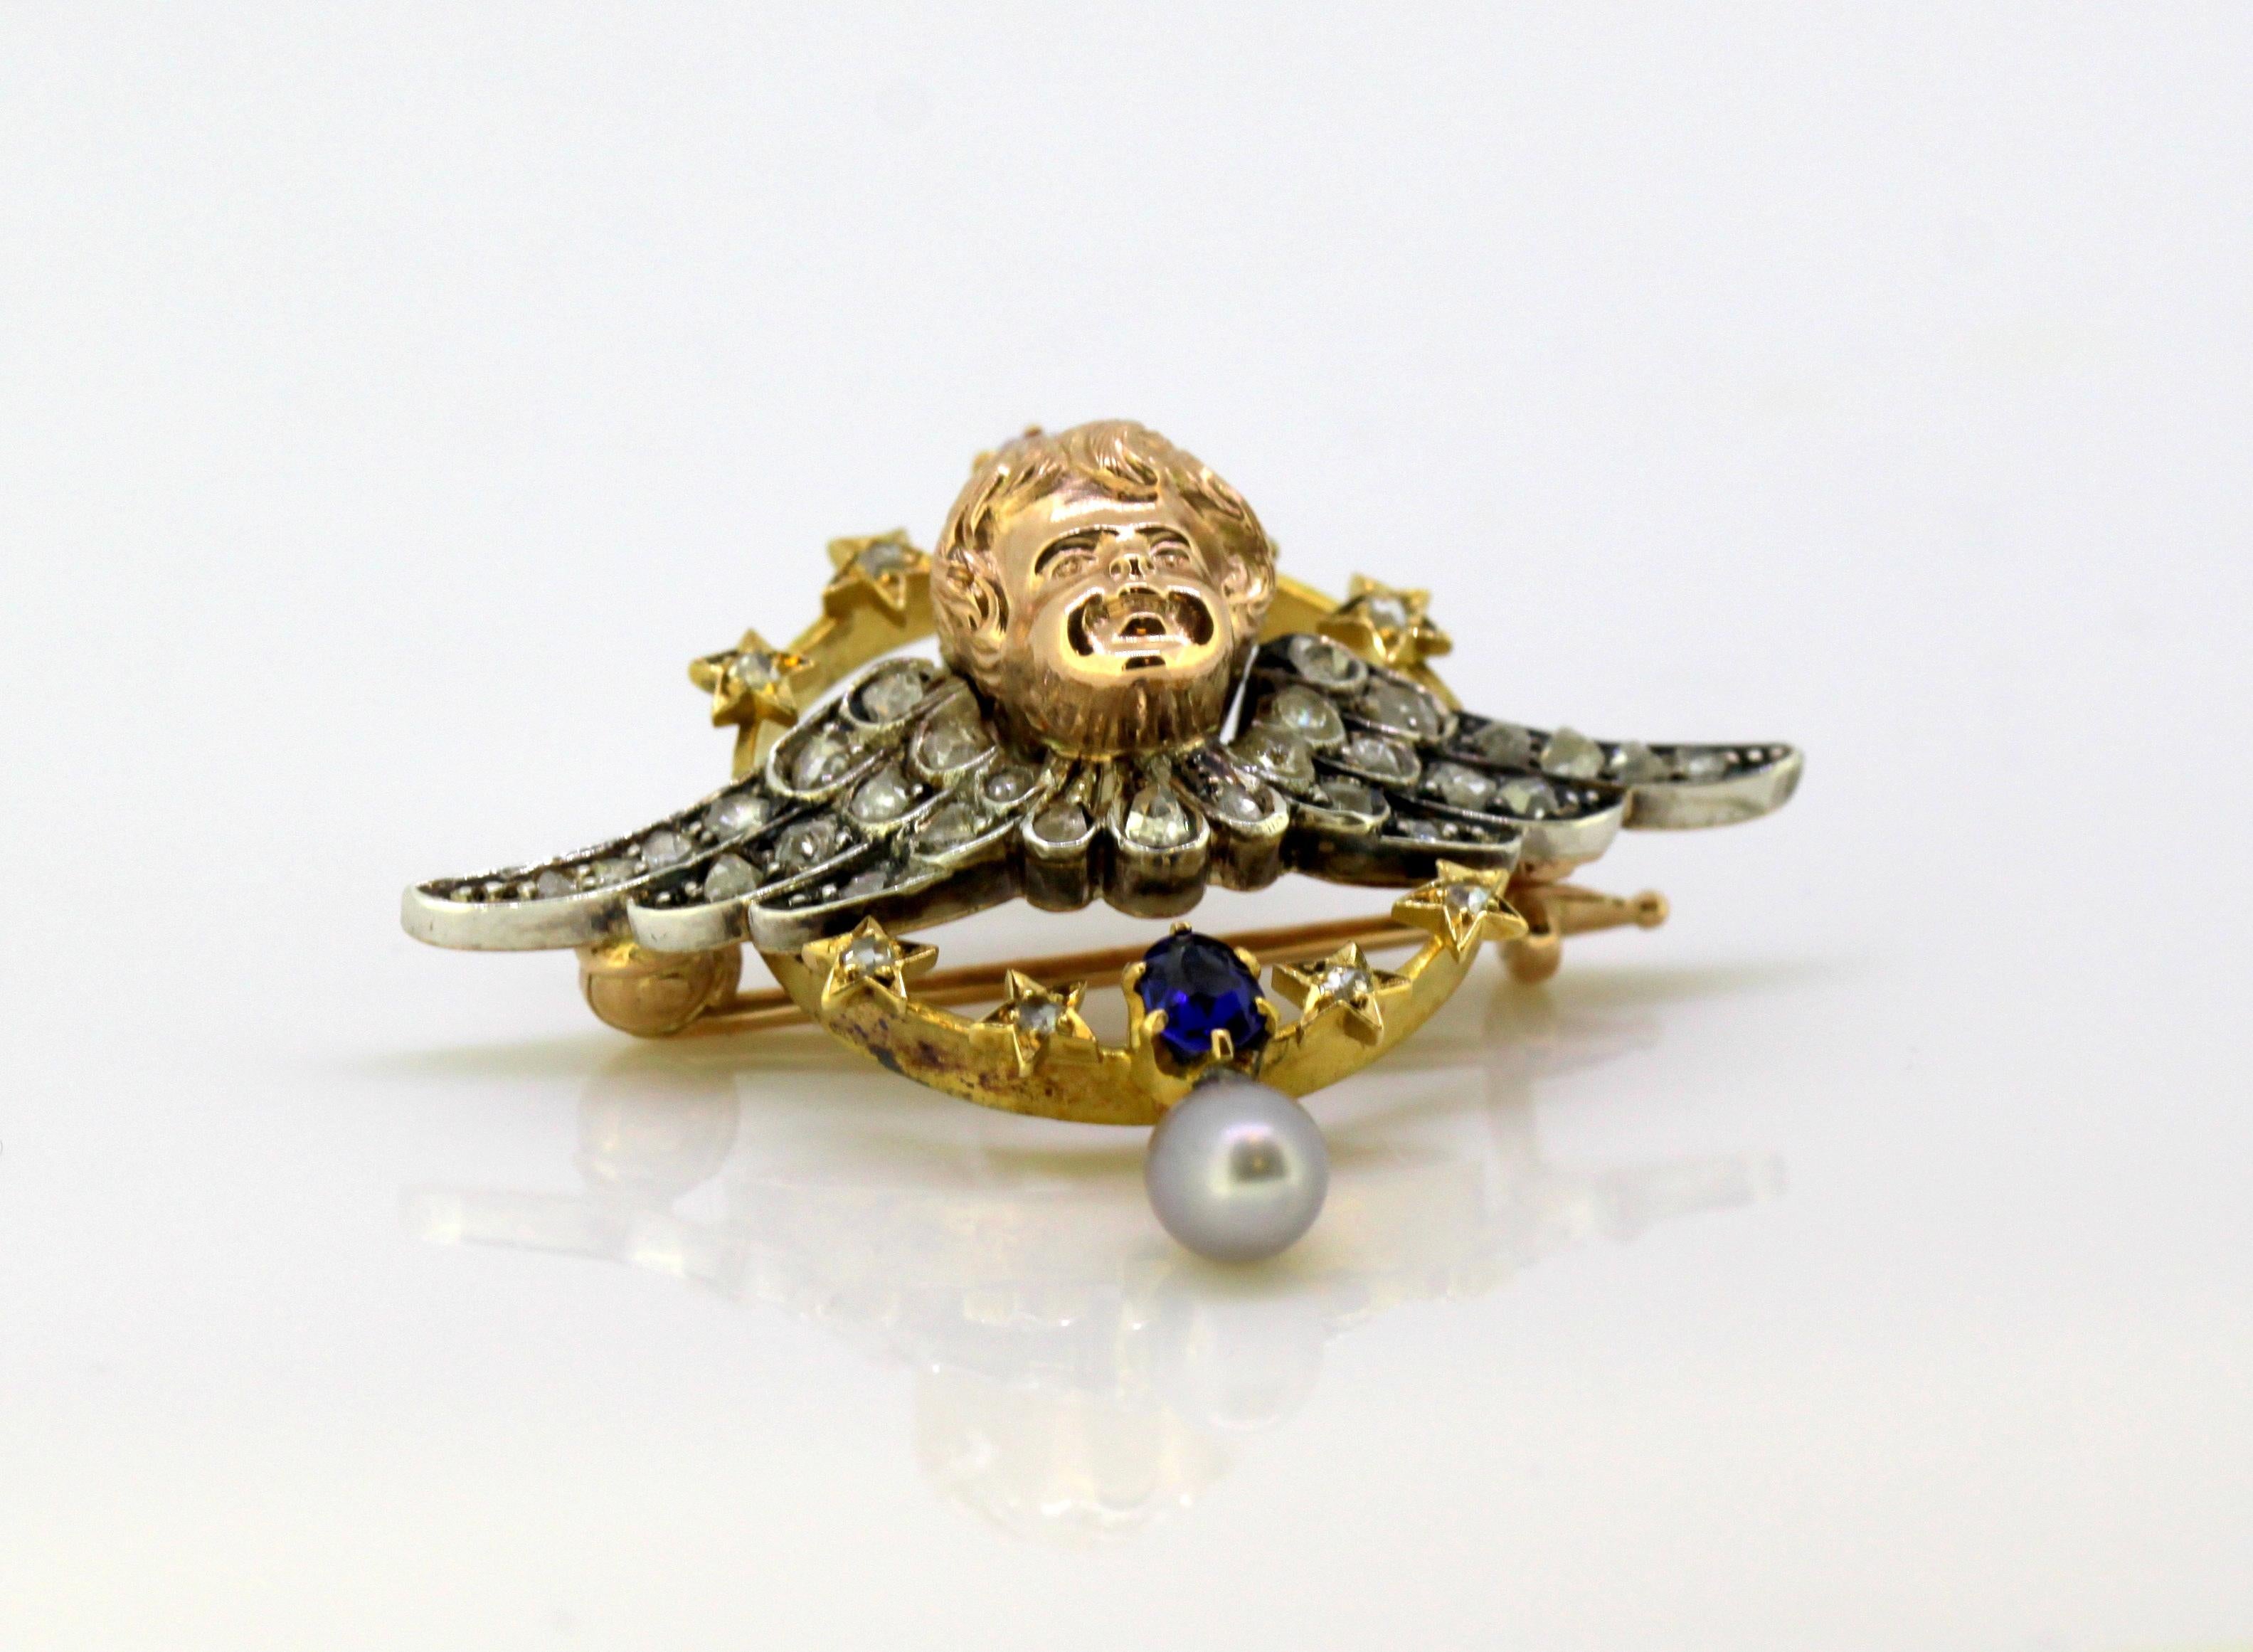 Antique 15 Karat Yellow Gold and Sterling Silver Brooch, Prague, 1880s 3